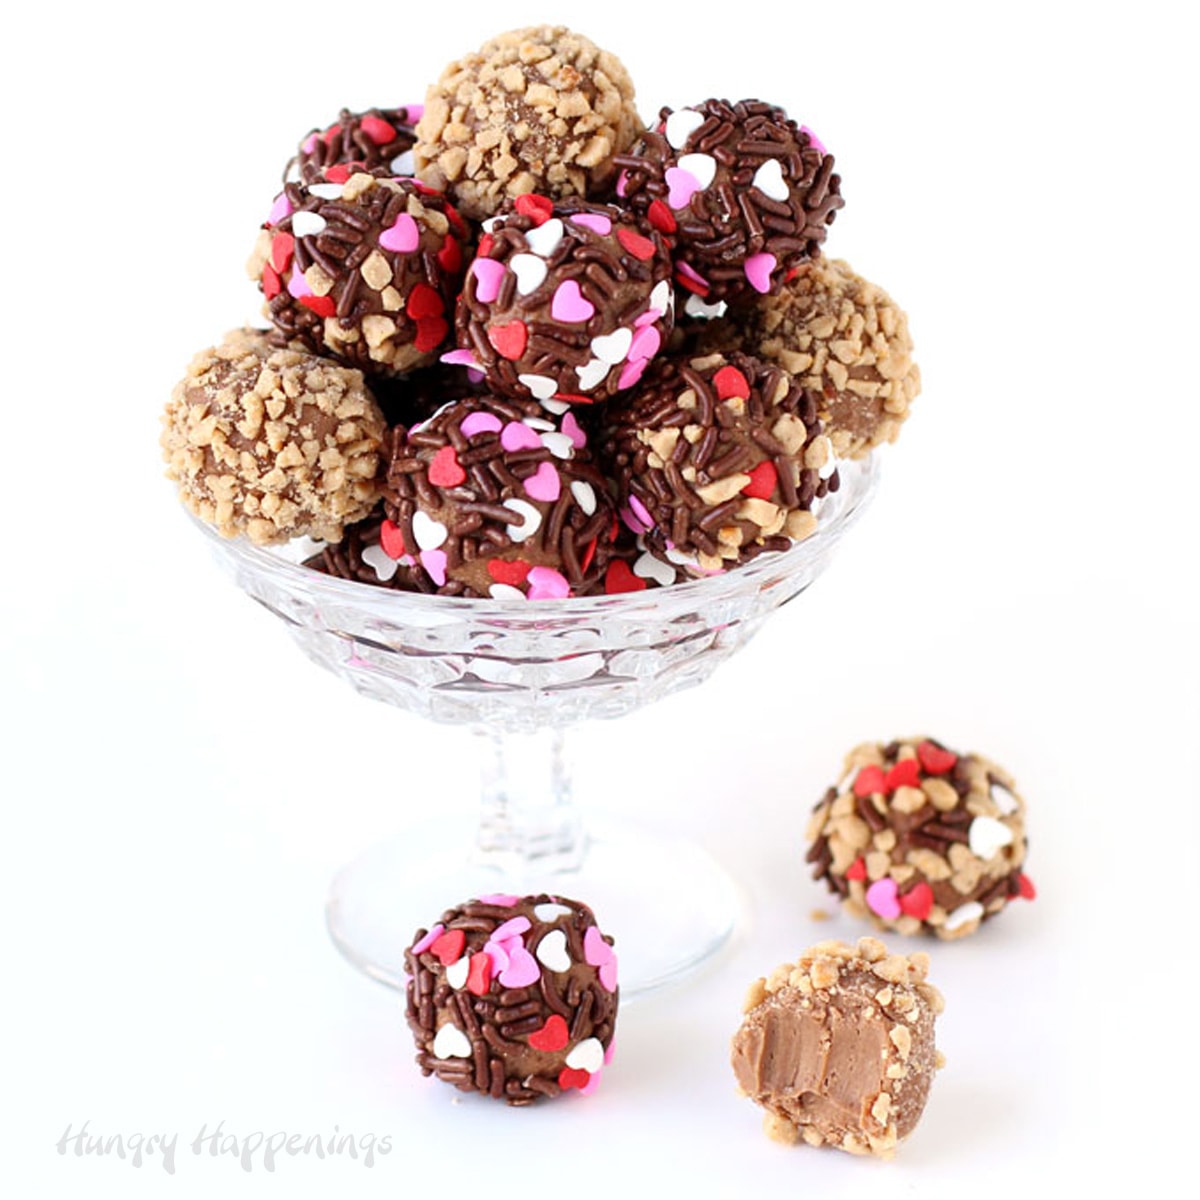 salted caramel truffles made using milk chocolate, salted caramel ice cream, toffee, and sprinkles